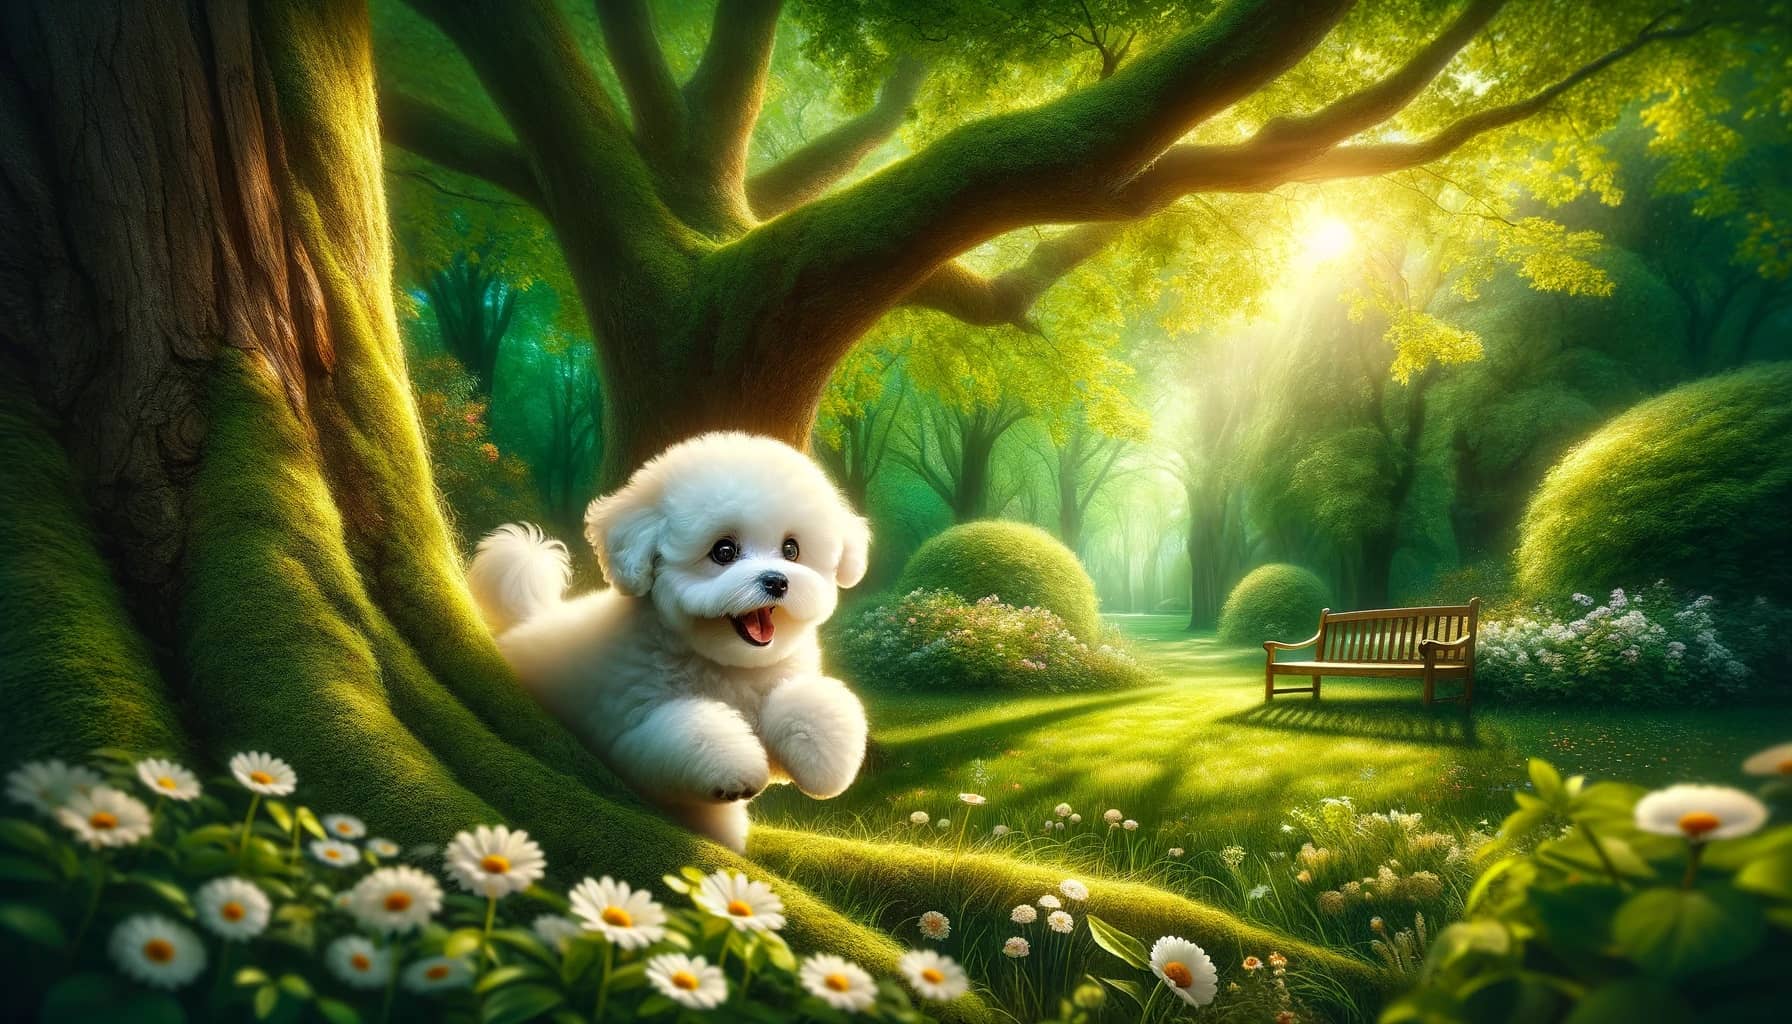 Bichon Frise puppy plays gleefully amidst towering trees and blooming flowers